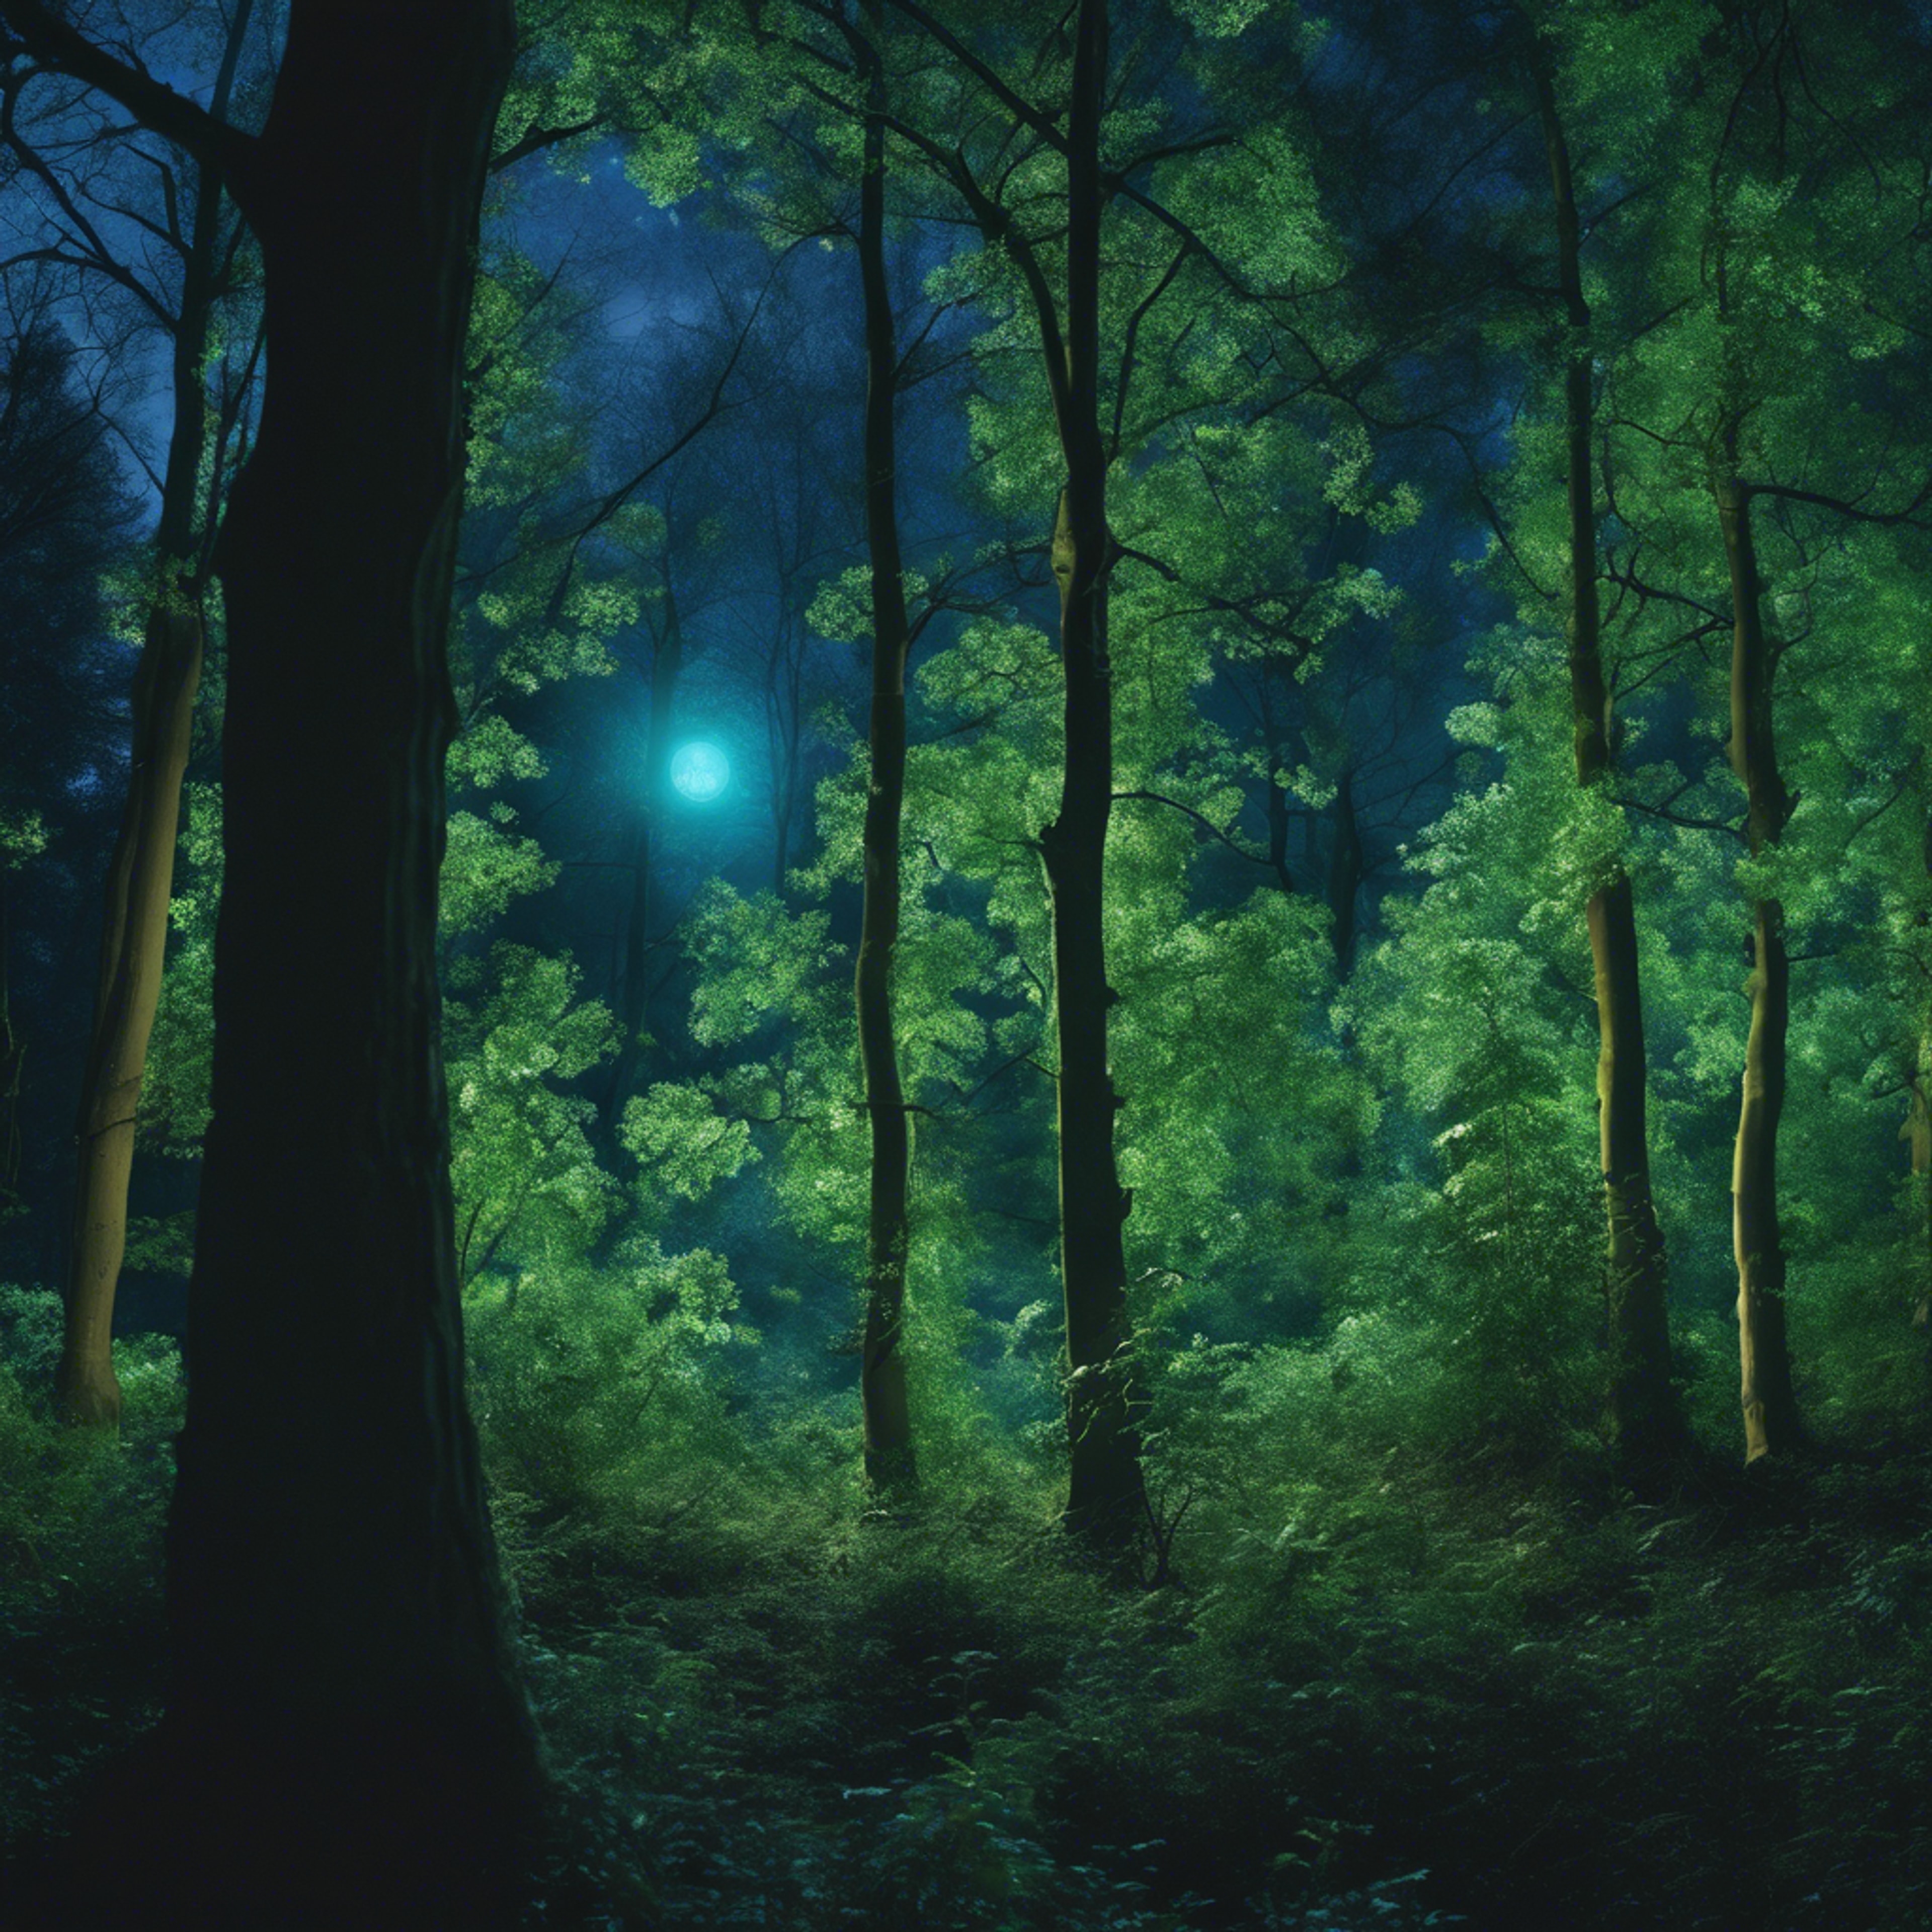 A mysterious green forest illuminated by the light of a full, bright blue moon. วอลล์เปเปอร์[93934147fb2e44e3af4b]